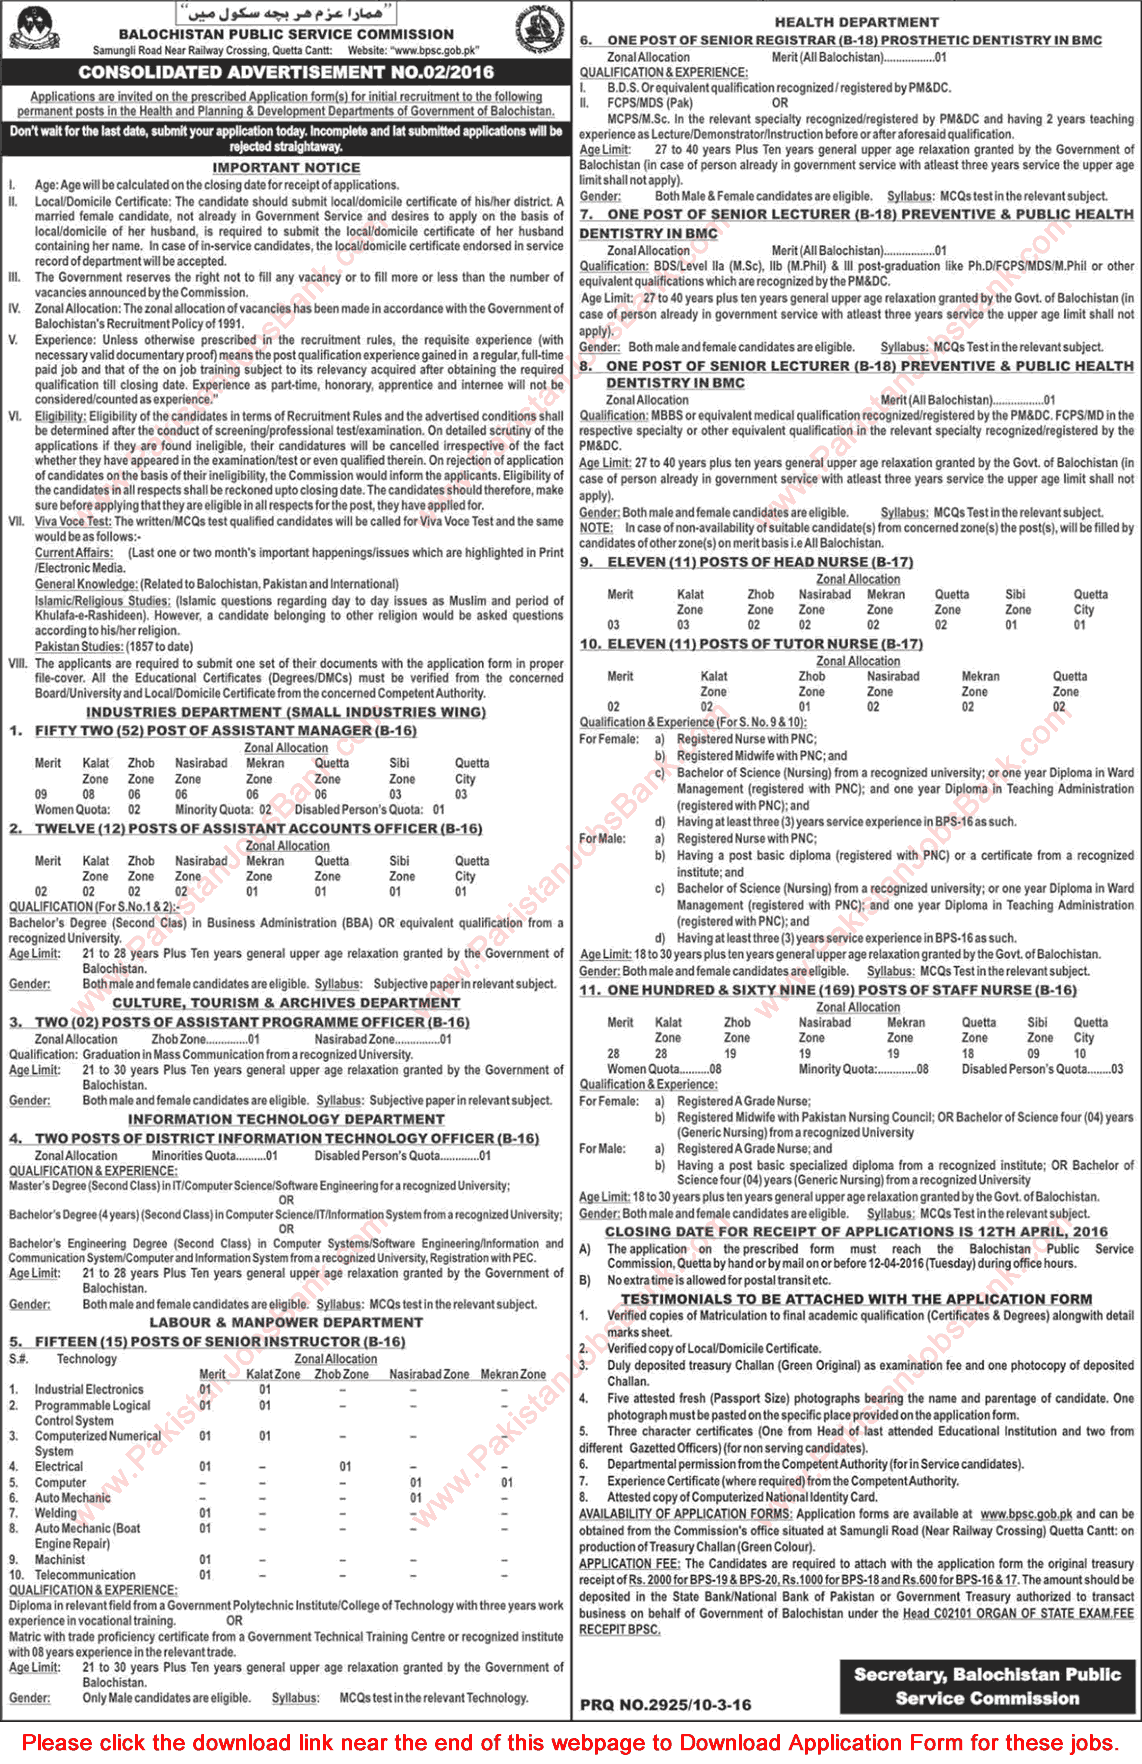 Balochistan Public Service Commission Jobs March 2016 BPSC Application Form Consolidated Advertisement No 02/2016 Latest